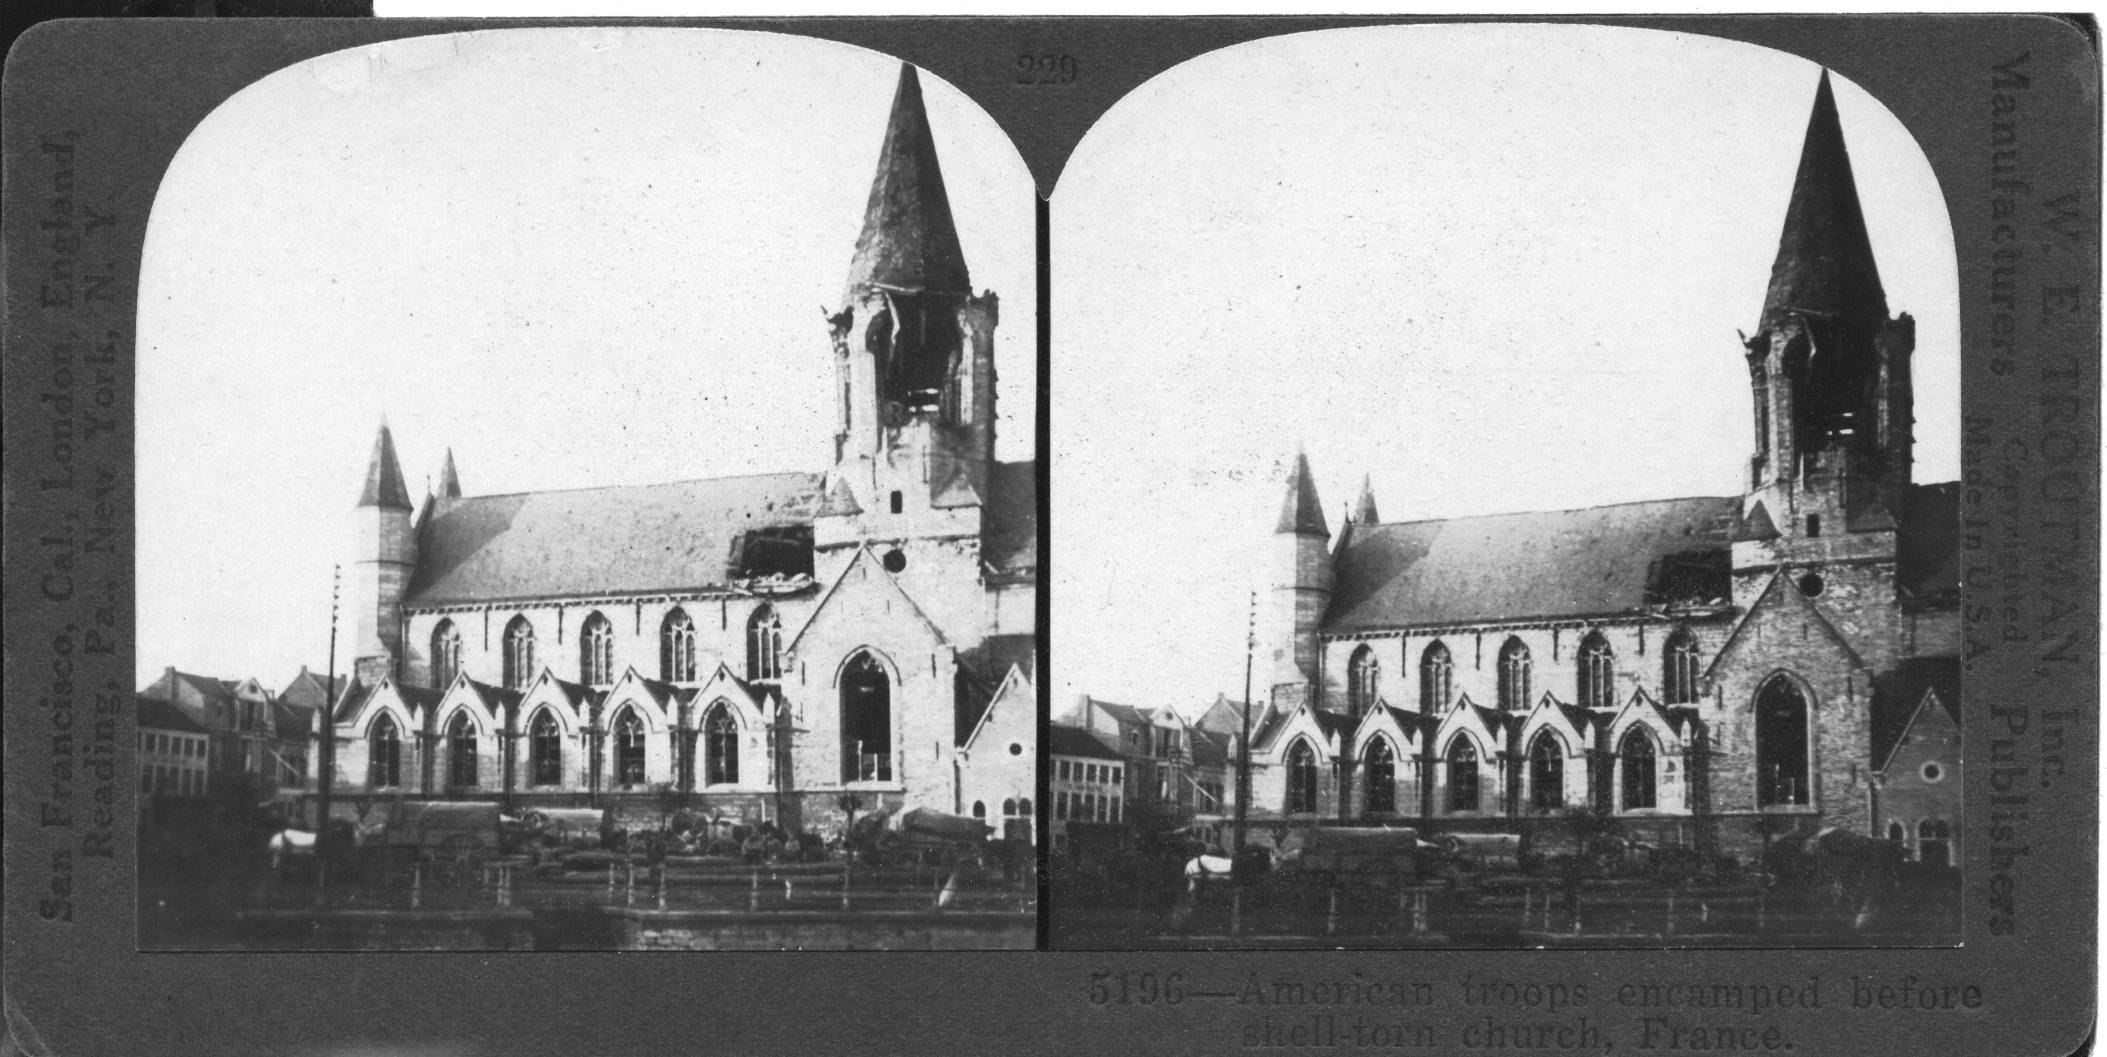 American troops encamped before shell-torn church, France